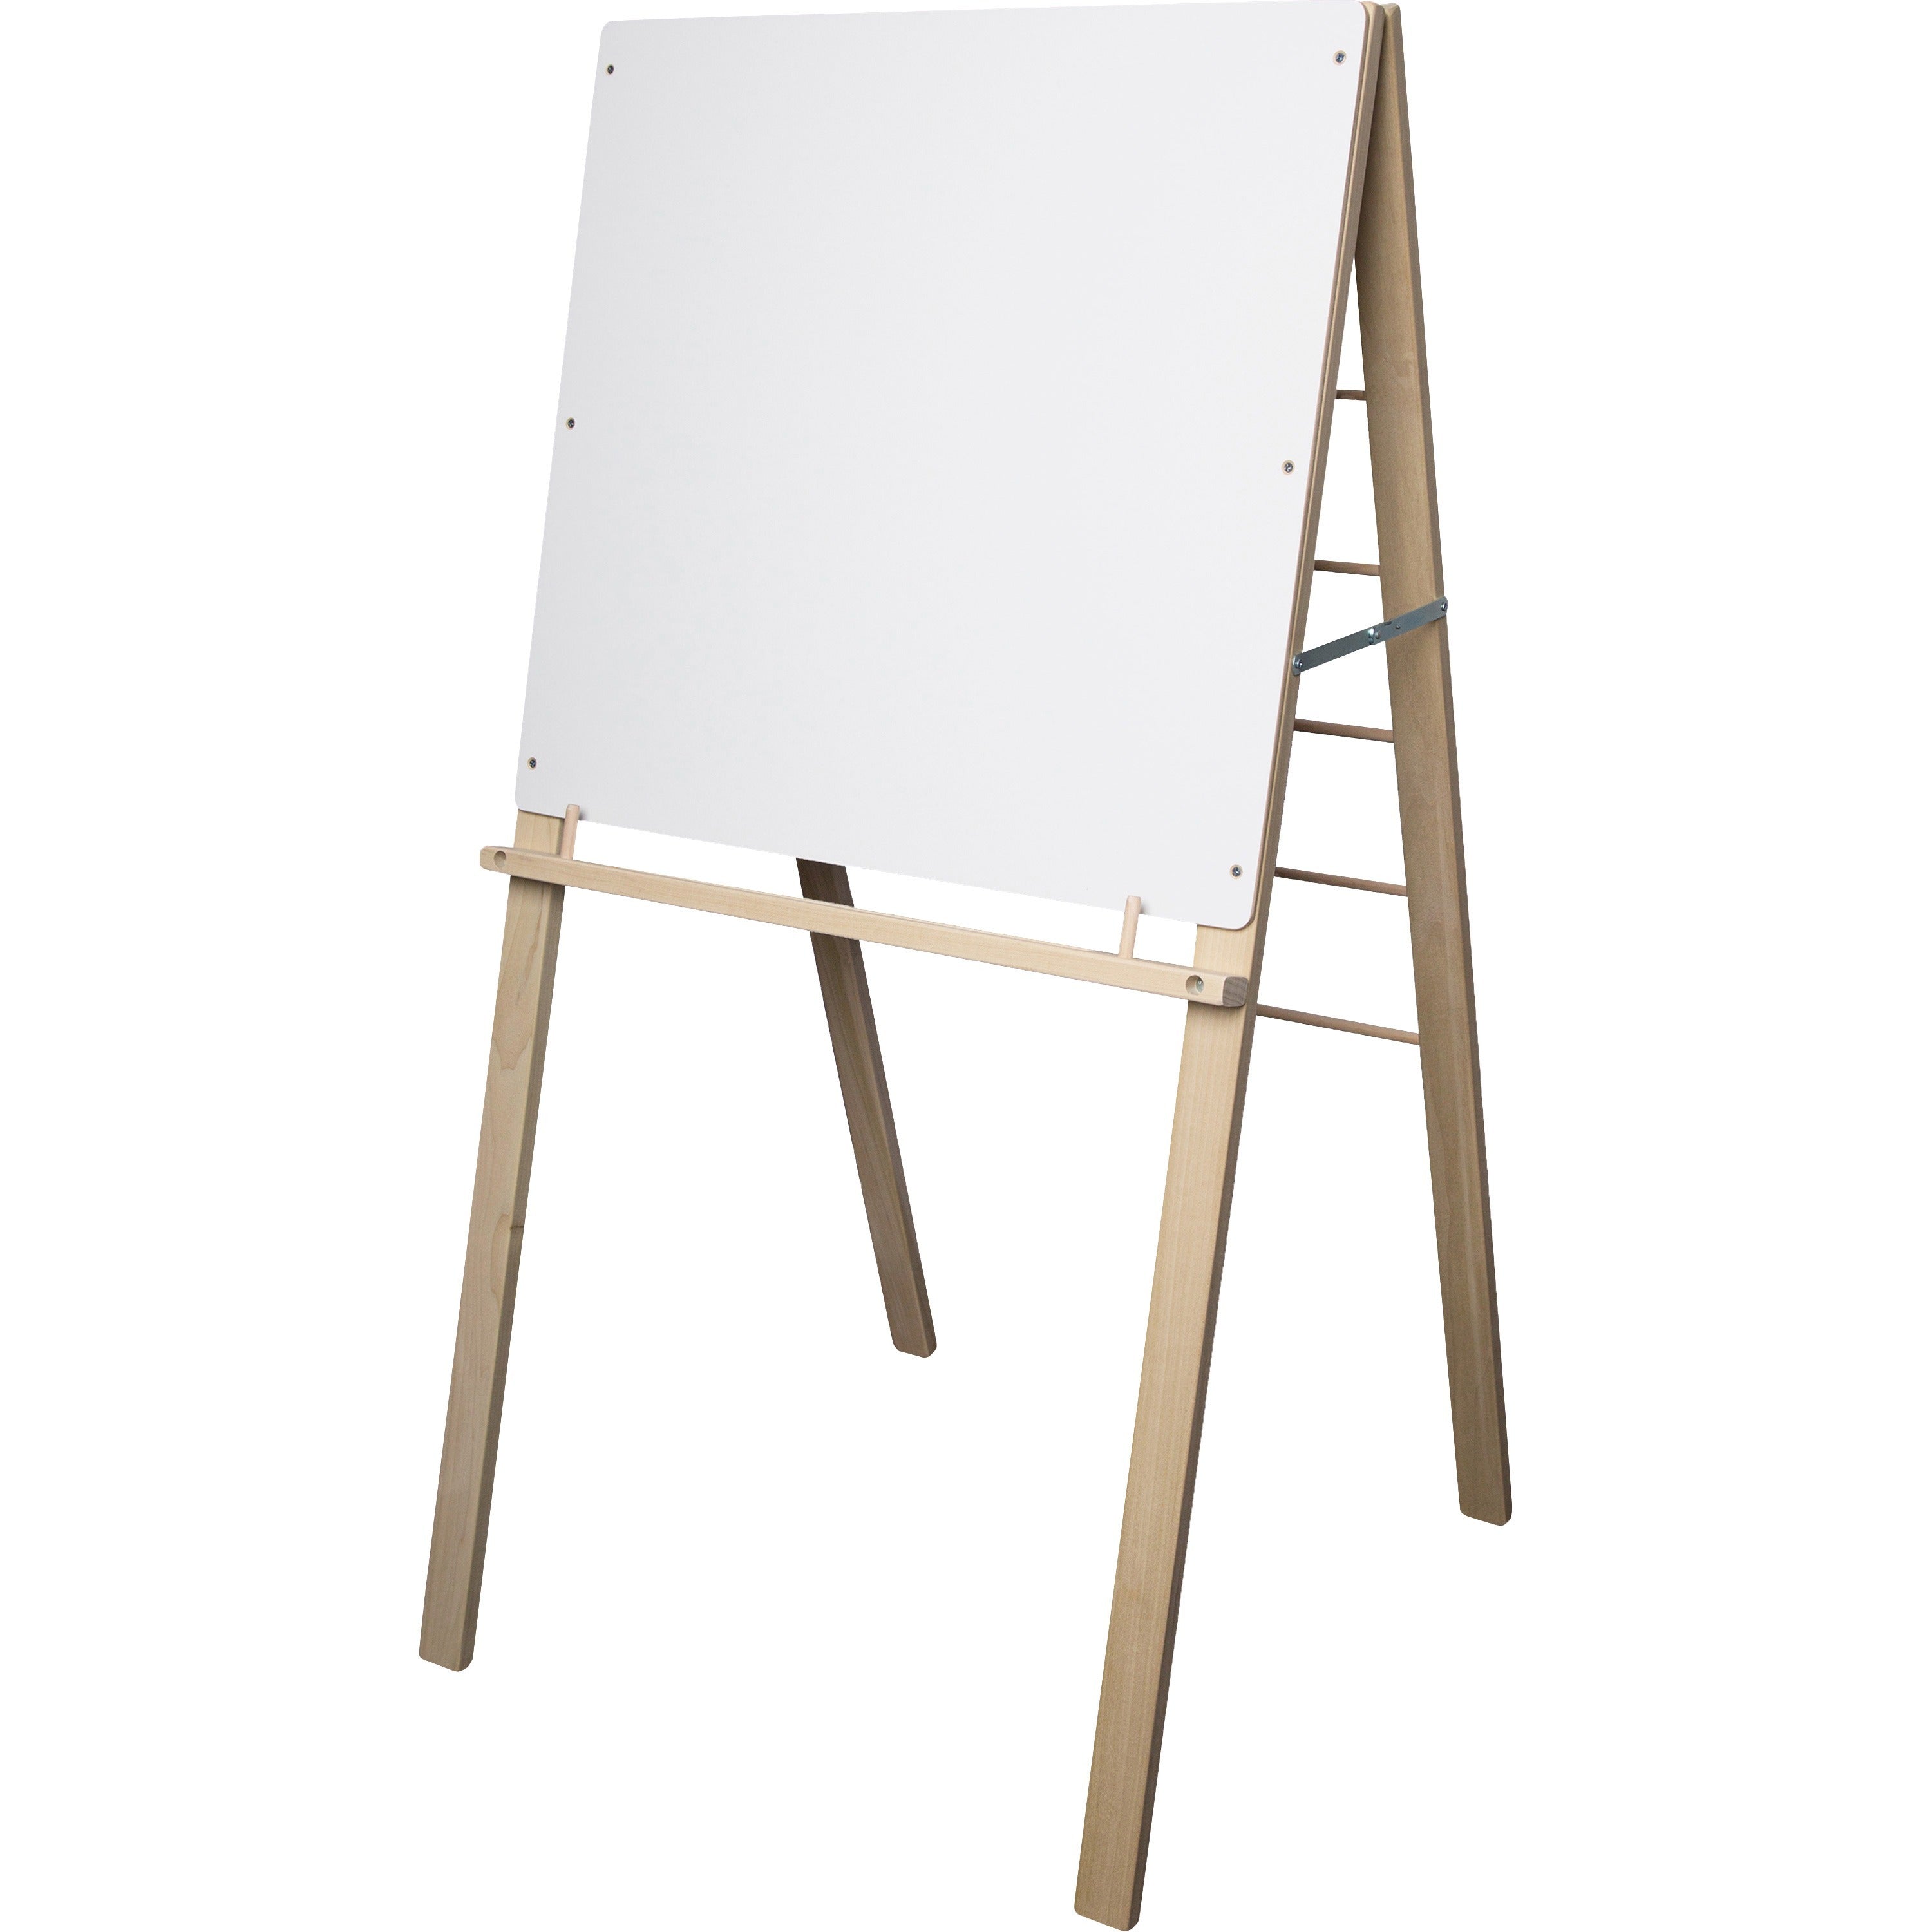 flipside-big-book-easel-24-2-ft-width-x-24-2-ft-height-white-surface-rectangle-assembly-required-1-each_flp17385 - 1